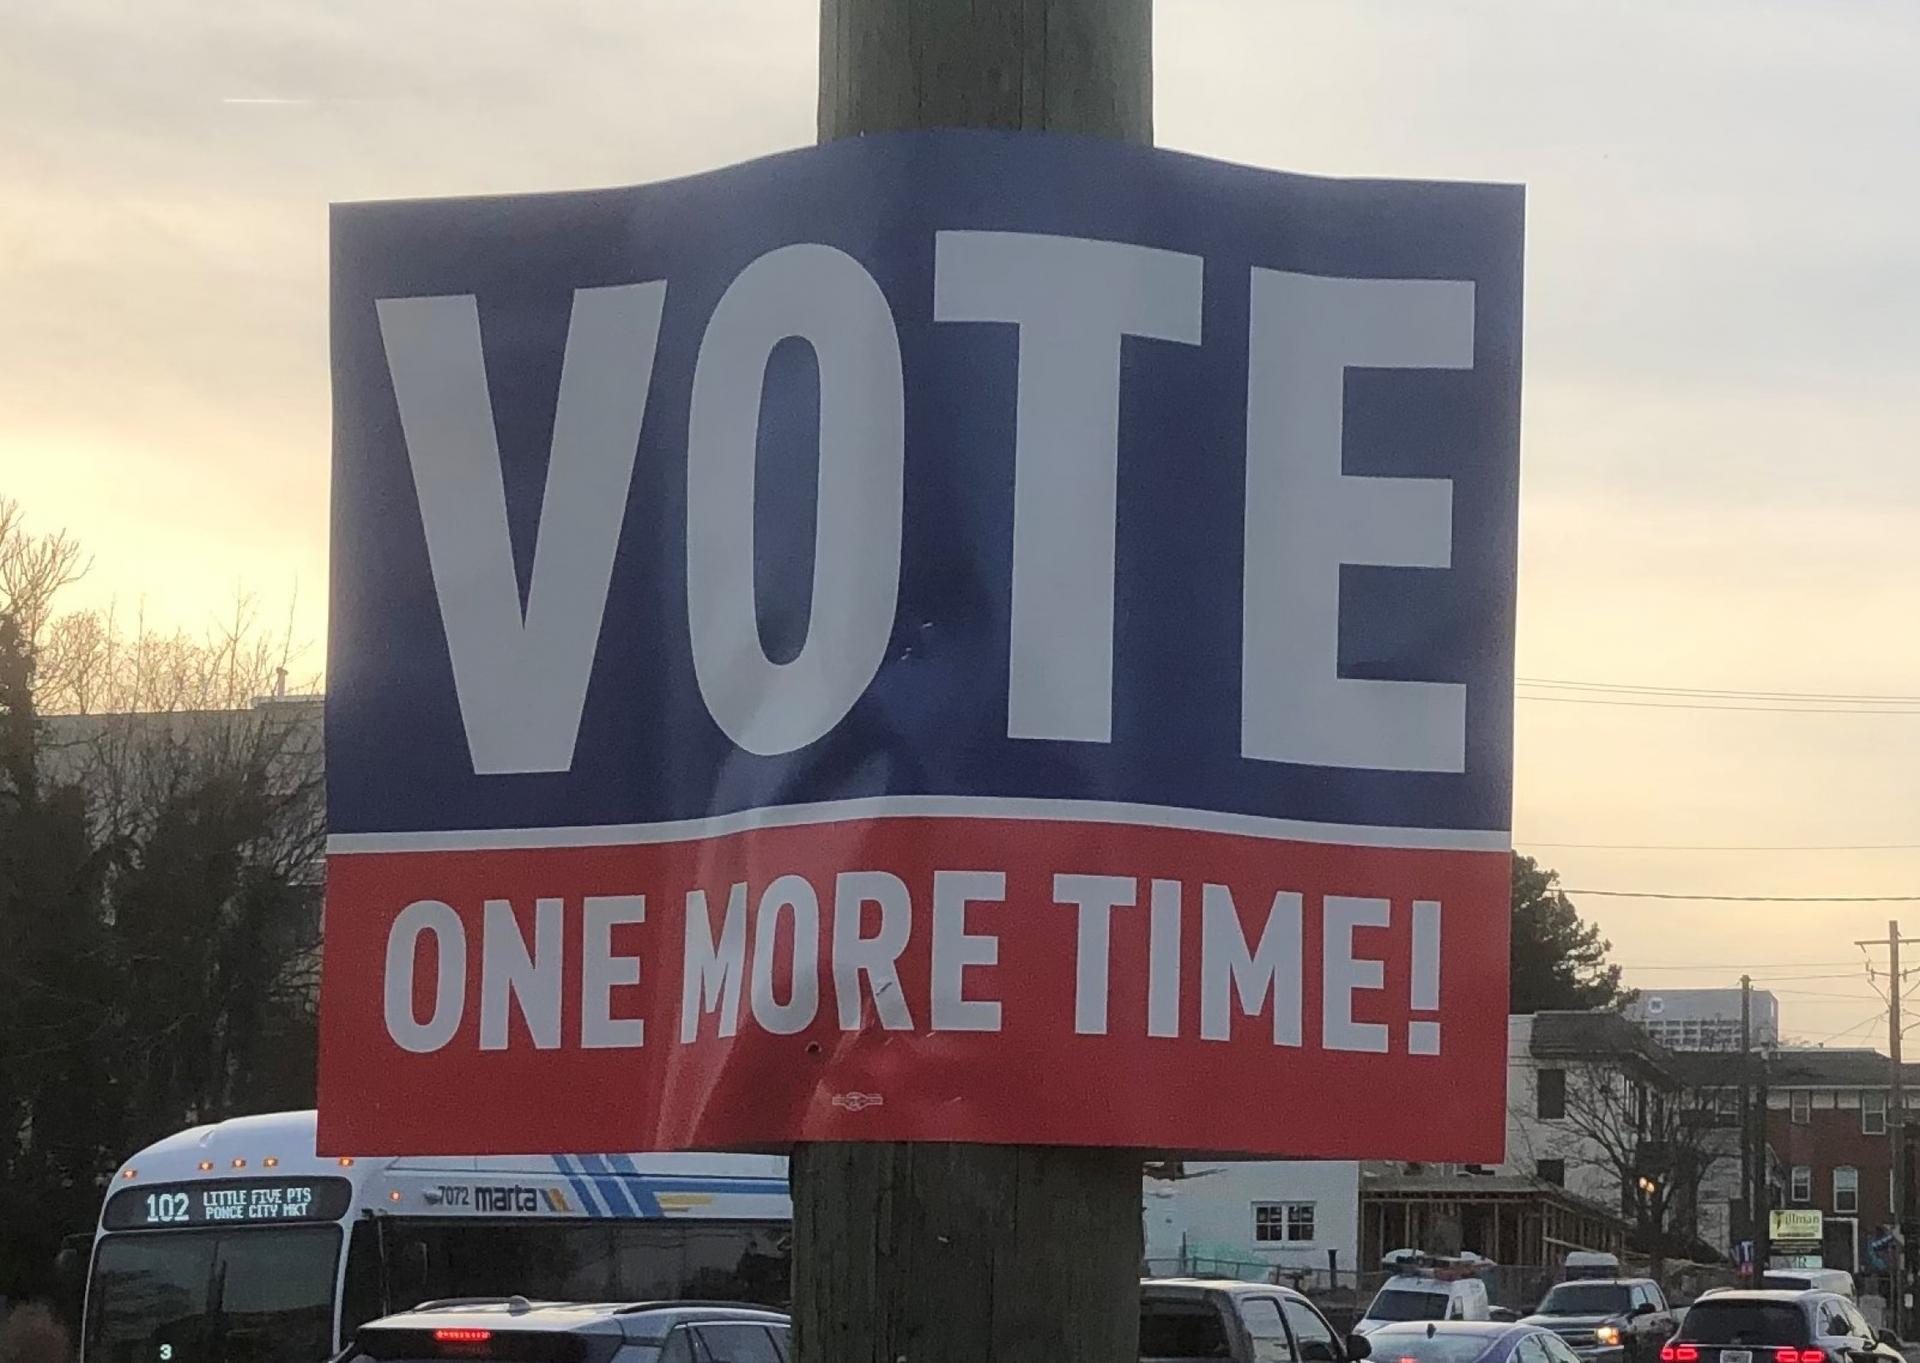 "Vote one more time" sign with blue, white and red letters. 